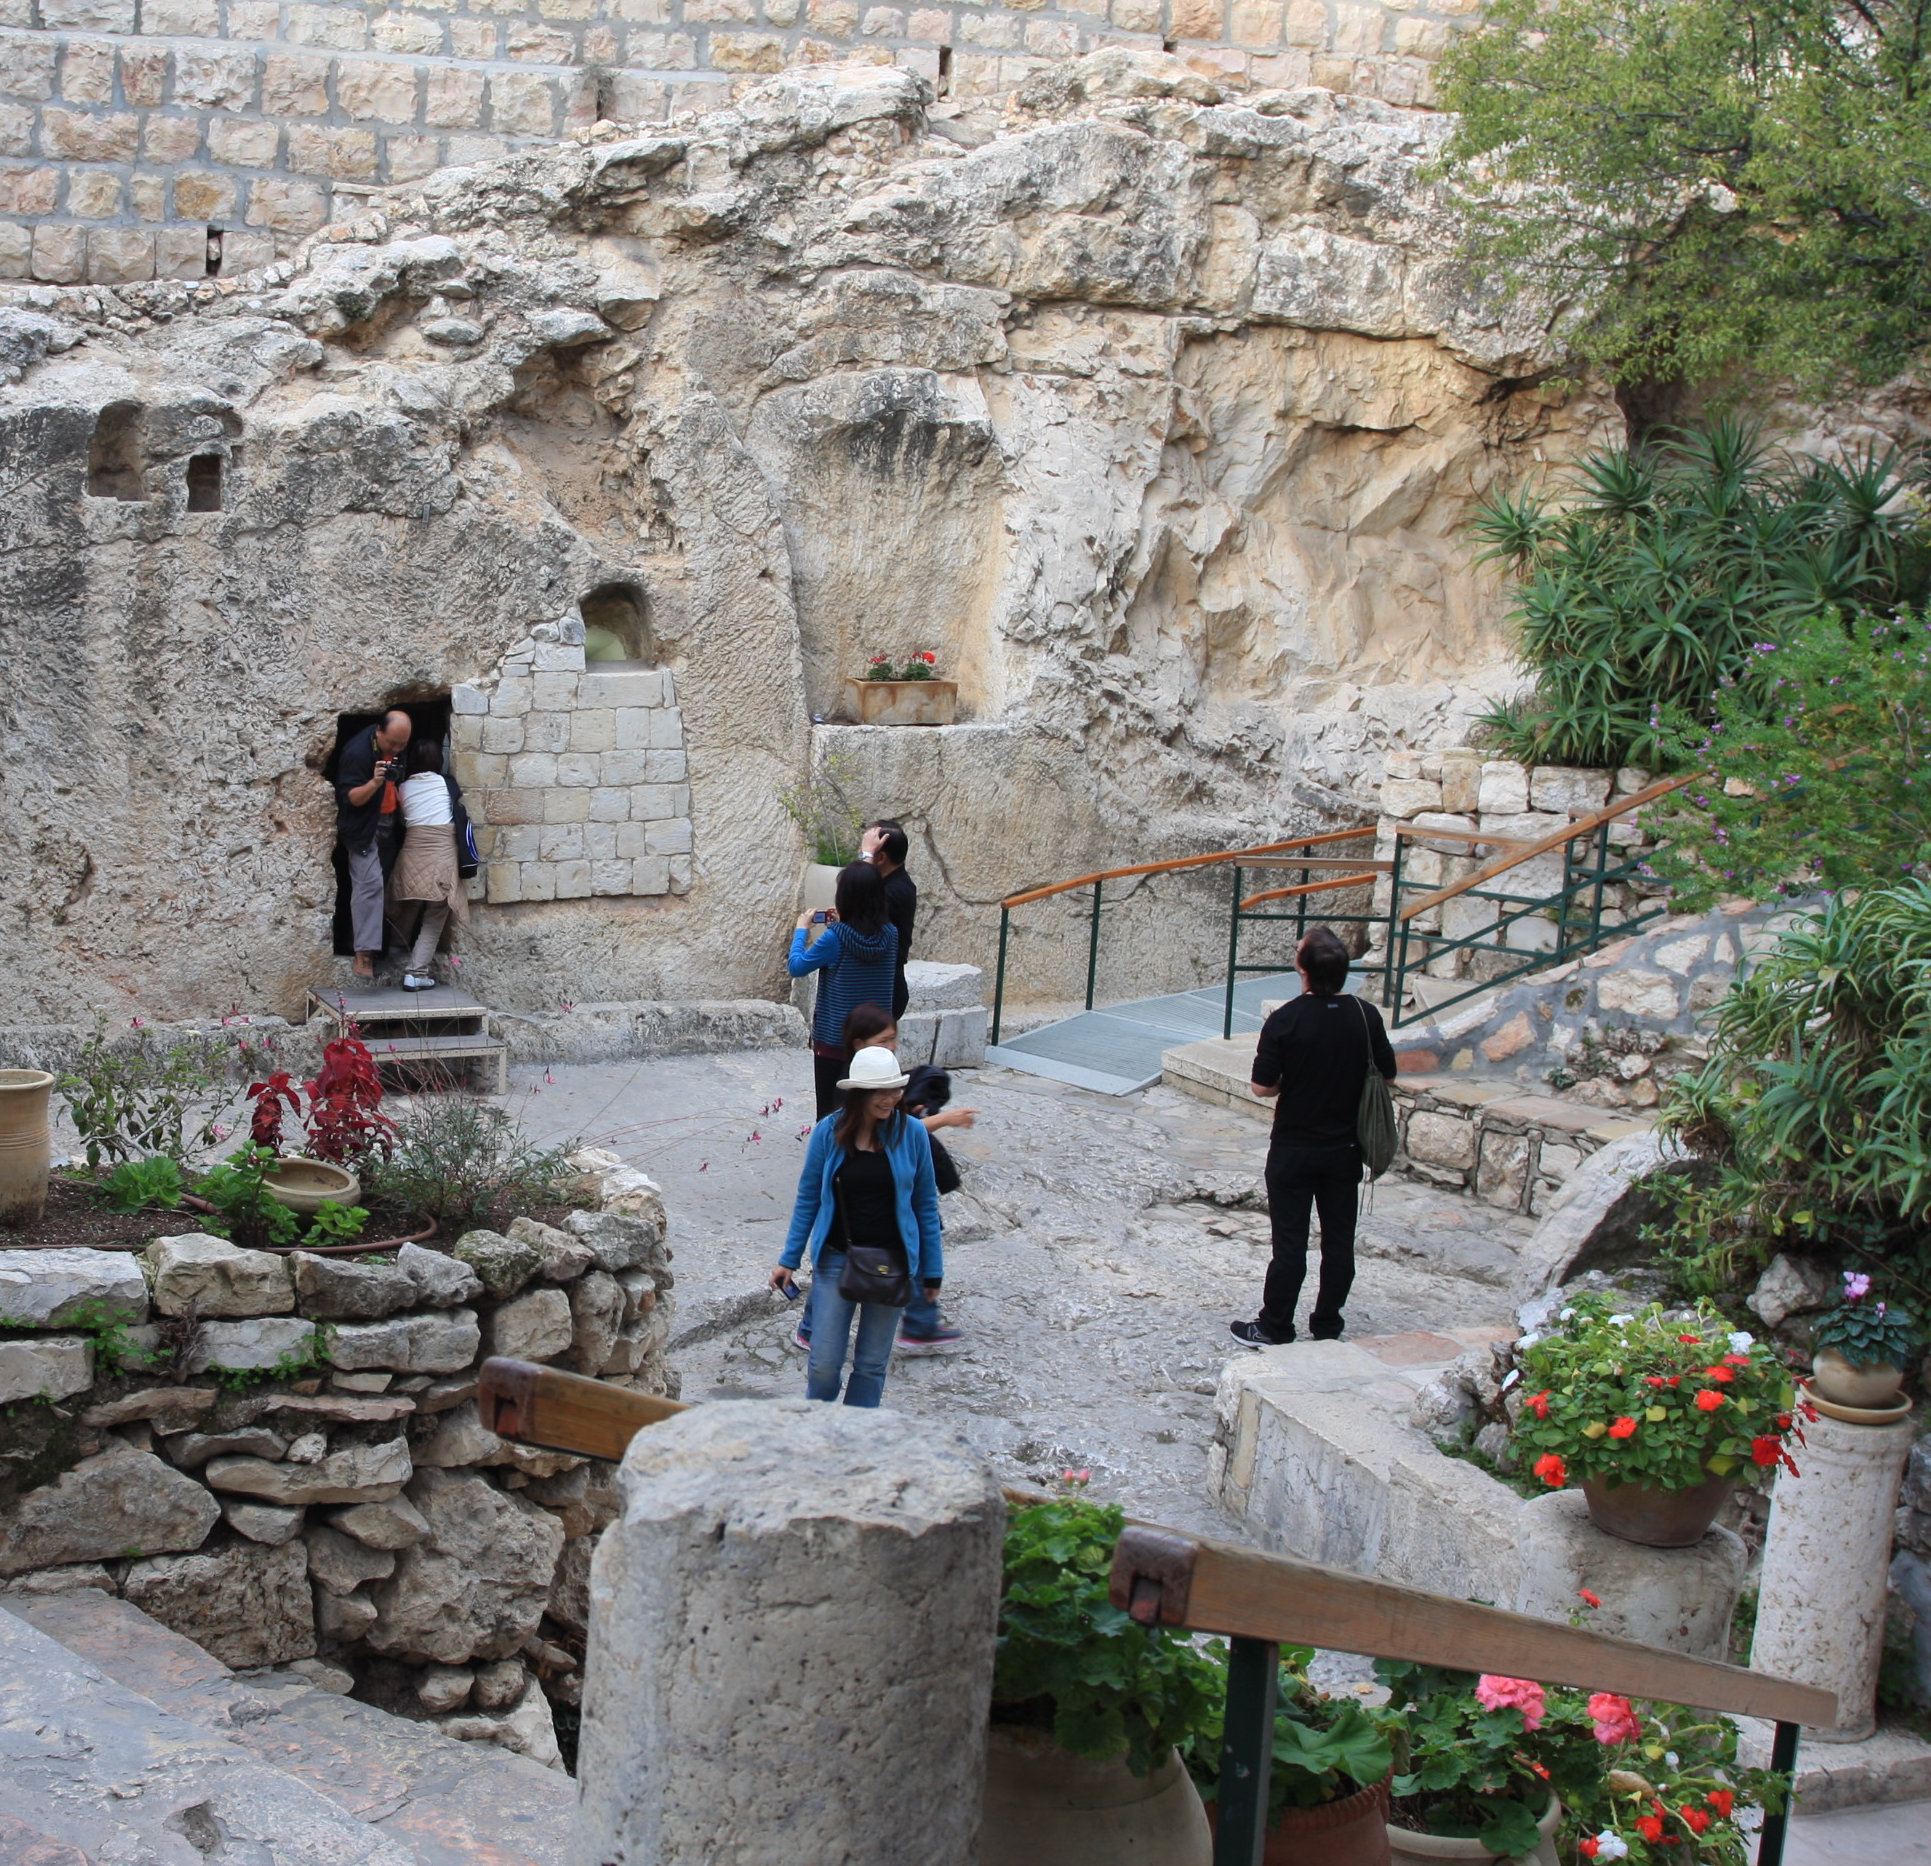 The empty tomb in the Garden Tomb, a site which could have been the place where Jesus was buried.